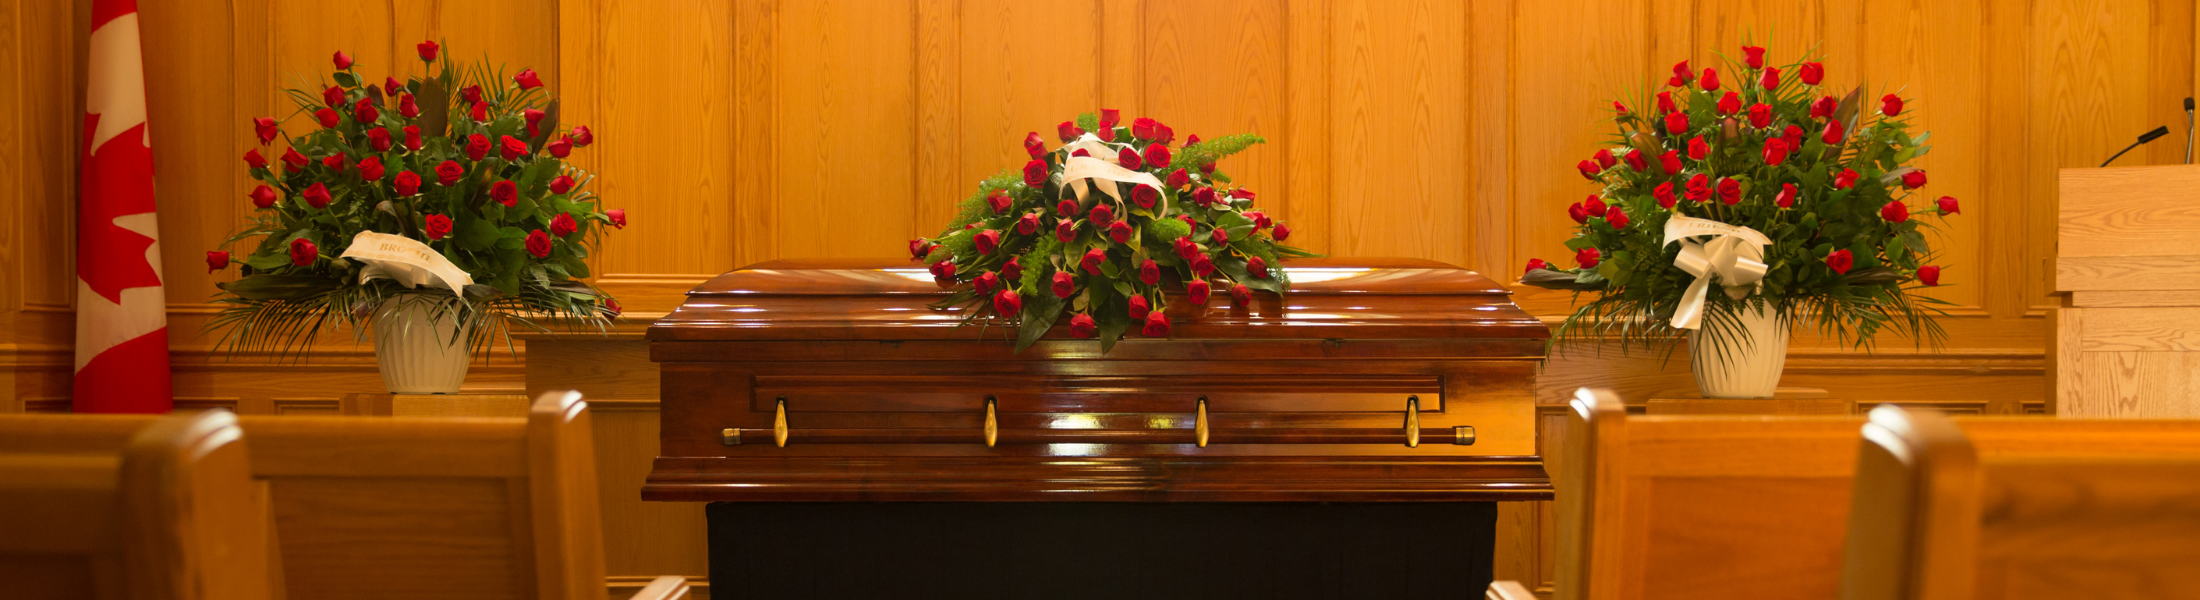 casket with red flowers atop and in background